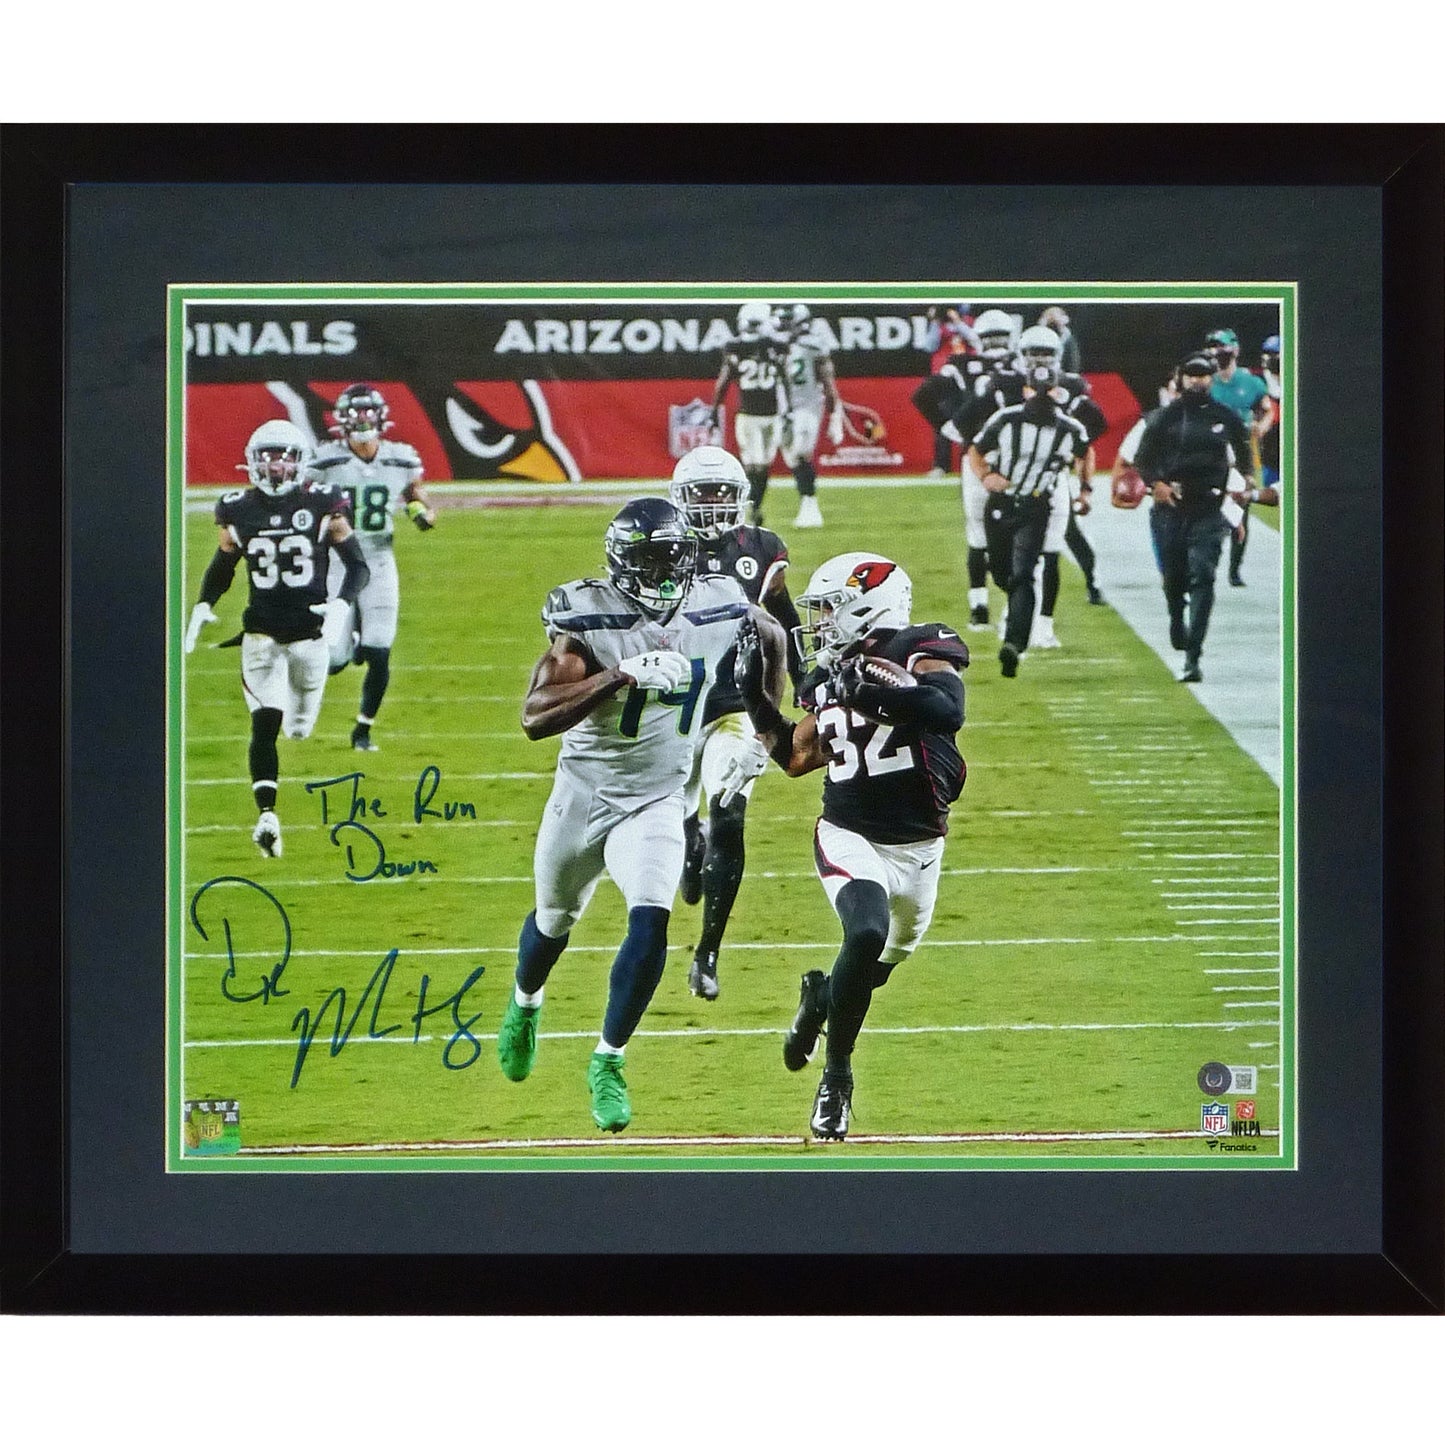 DK Metcalf Autographed Seattle Seahawks Deluxe Framed 16x20 Photo w/ "The Run Down" - Beckett